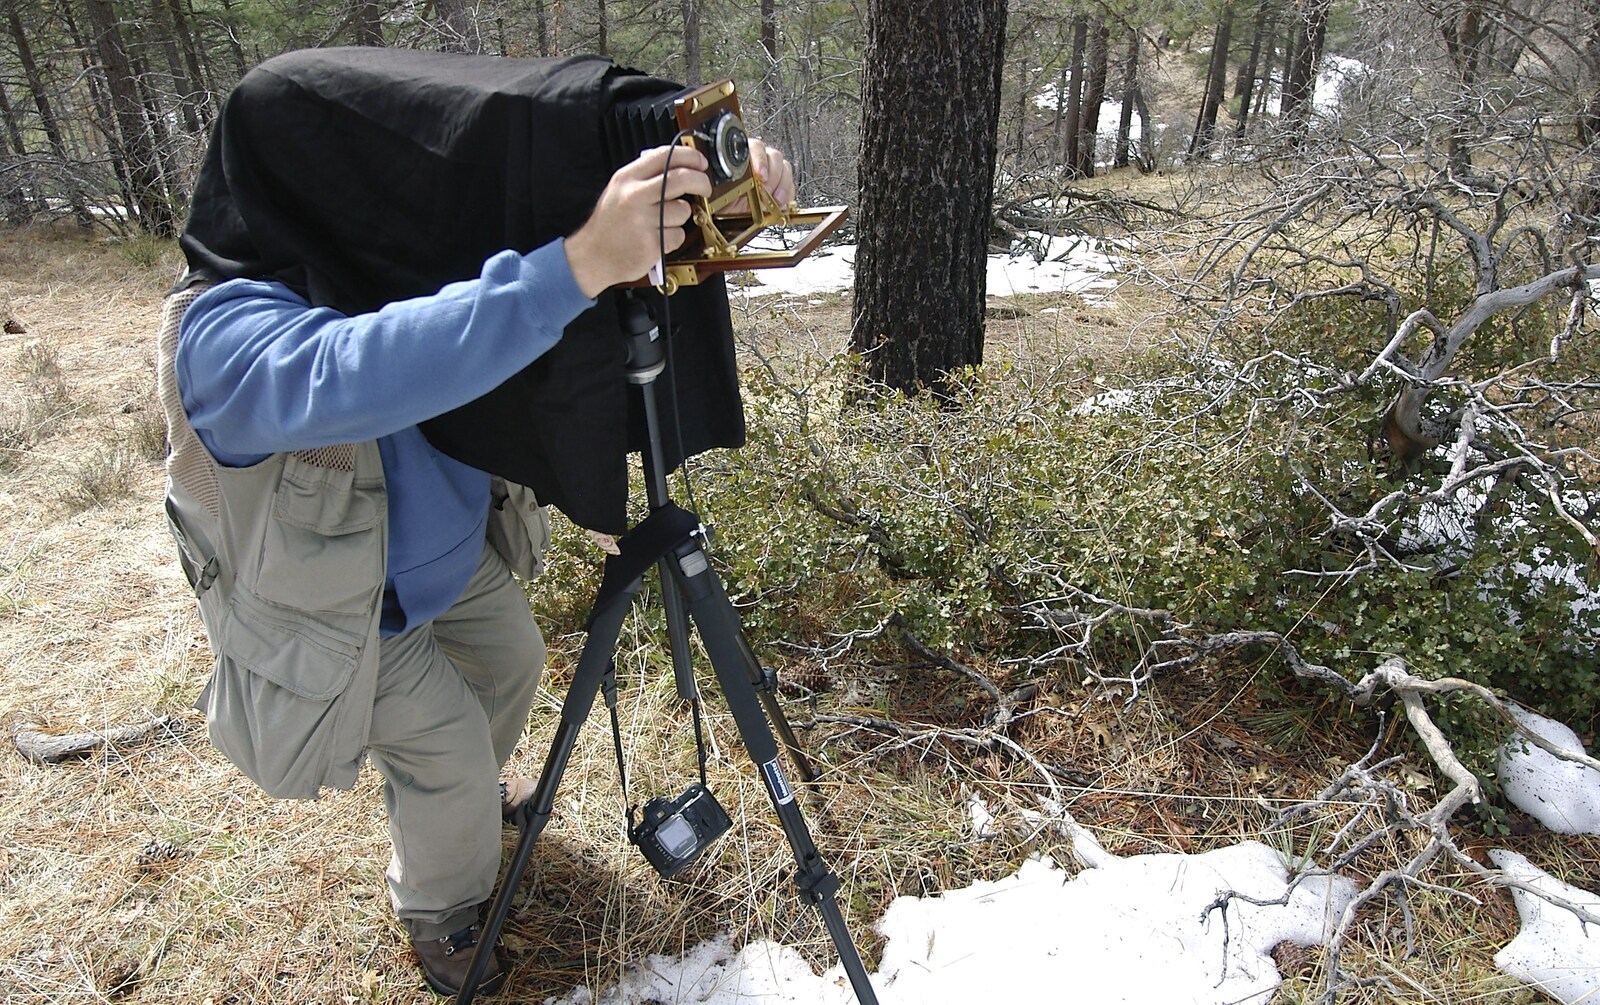 Ken checks composition under the cover of a field camera from California Snow: San Bernadino State Forest, California, US - 26th March 2006